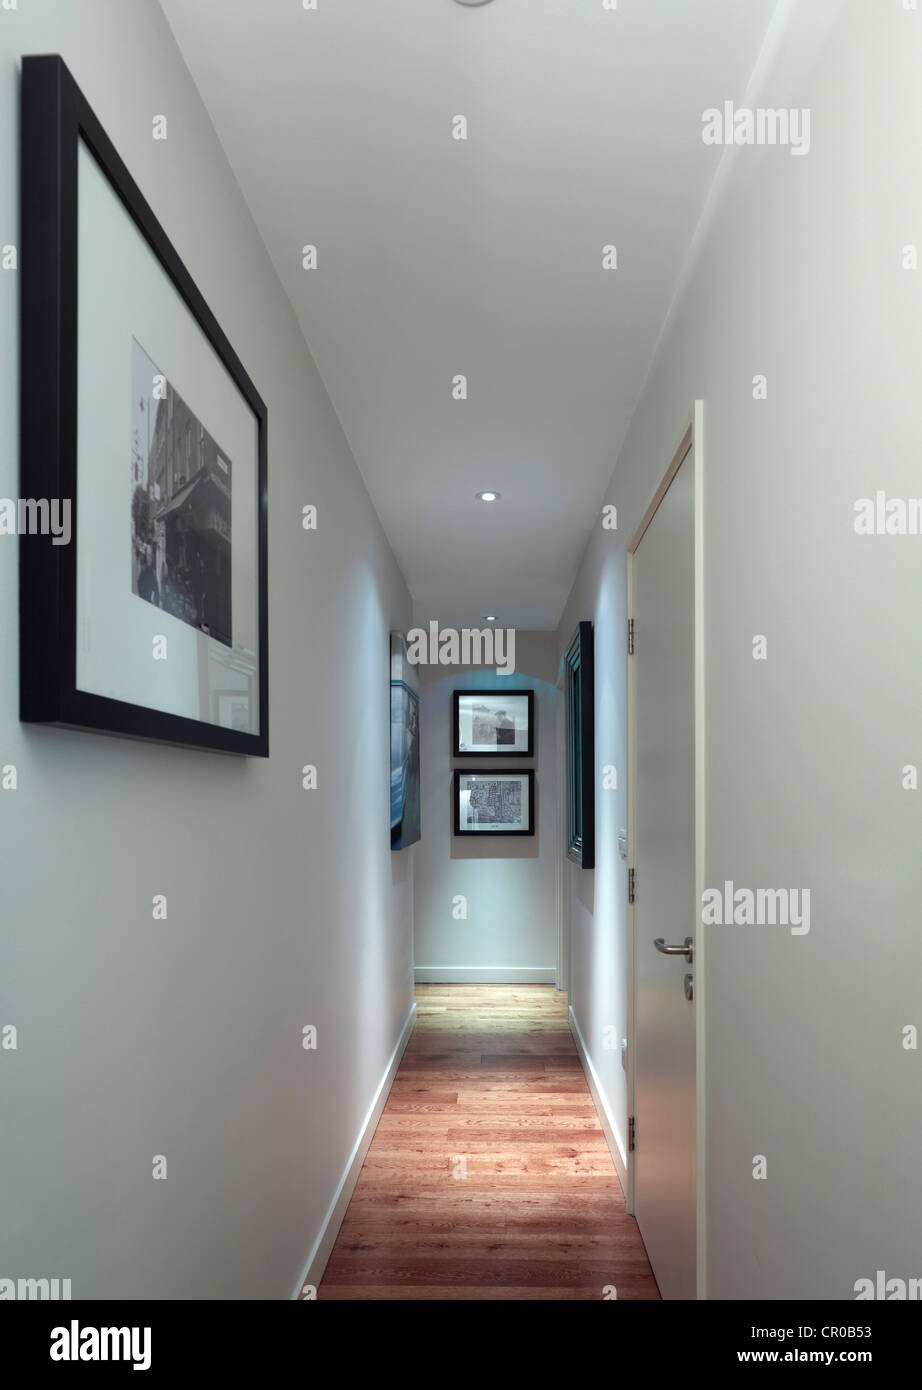 long corridor with wooden floor and white walls with pictures hanging Stock Photo